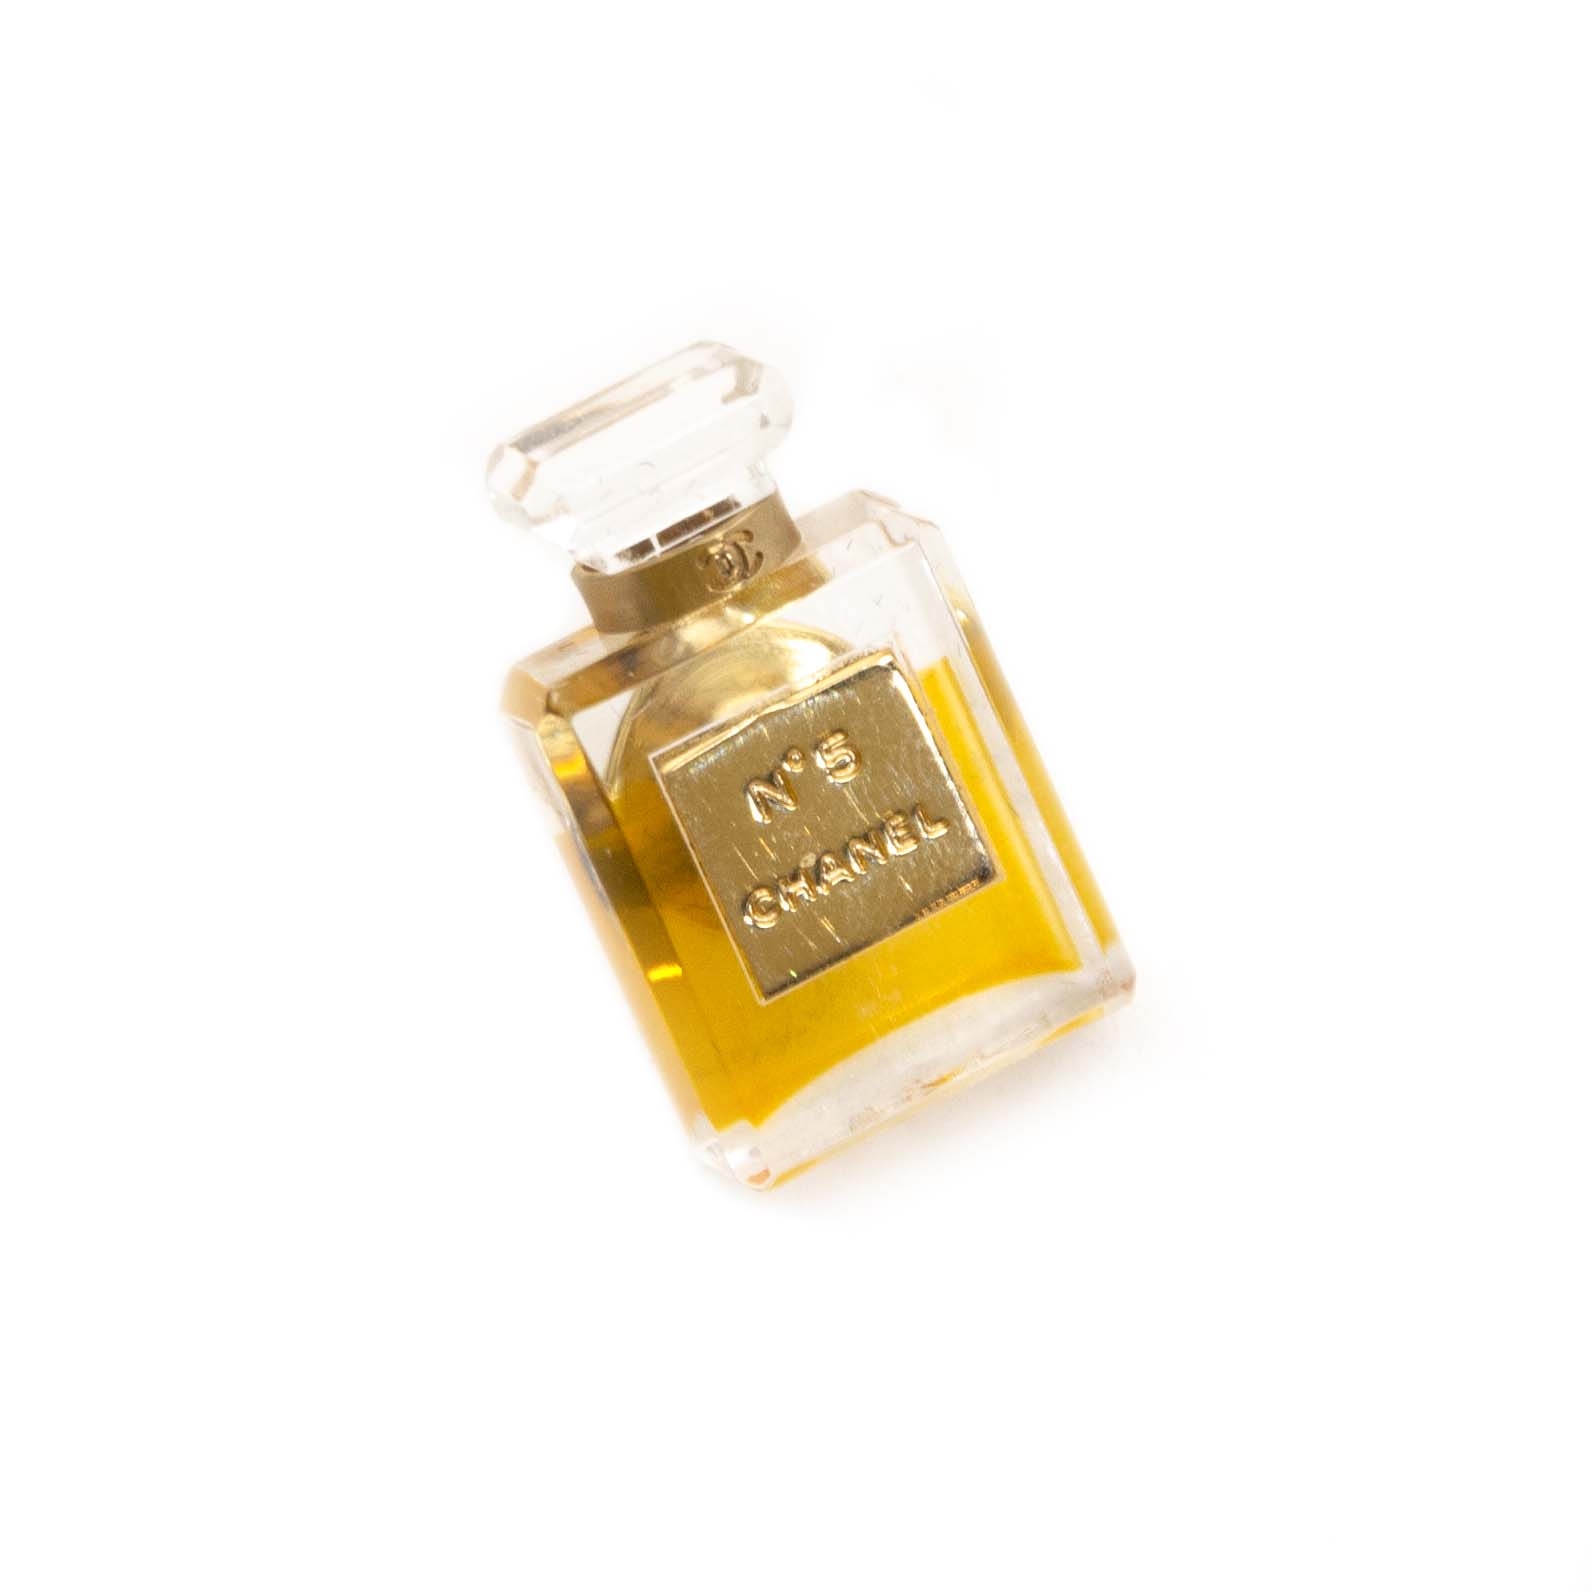 Chanel No. 5 Perfume Bottle Brooch Labellov Buy and Sell Authentic Luxury